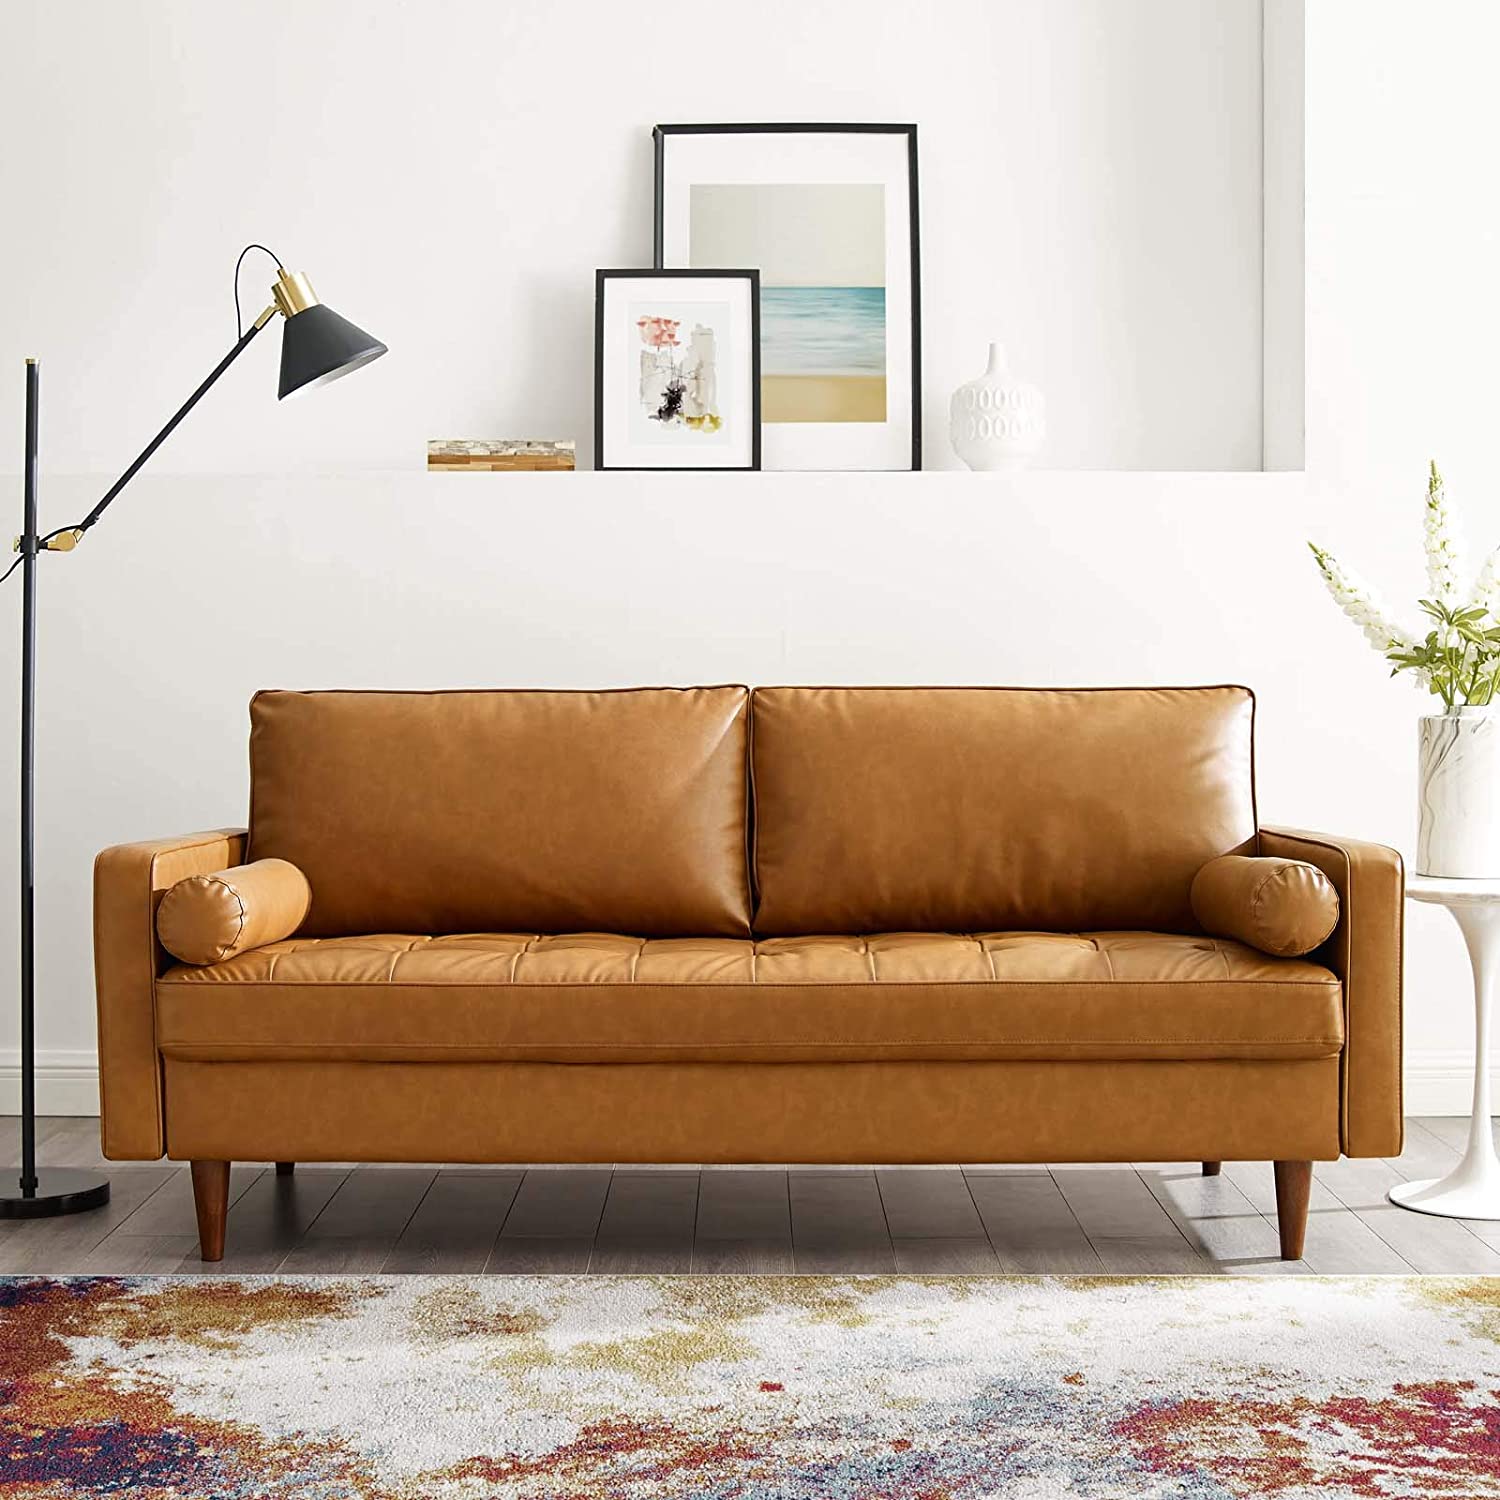 mid-century modern small sofa for bedrooms vegan leather upholstery ...